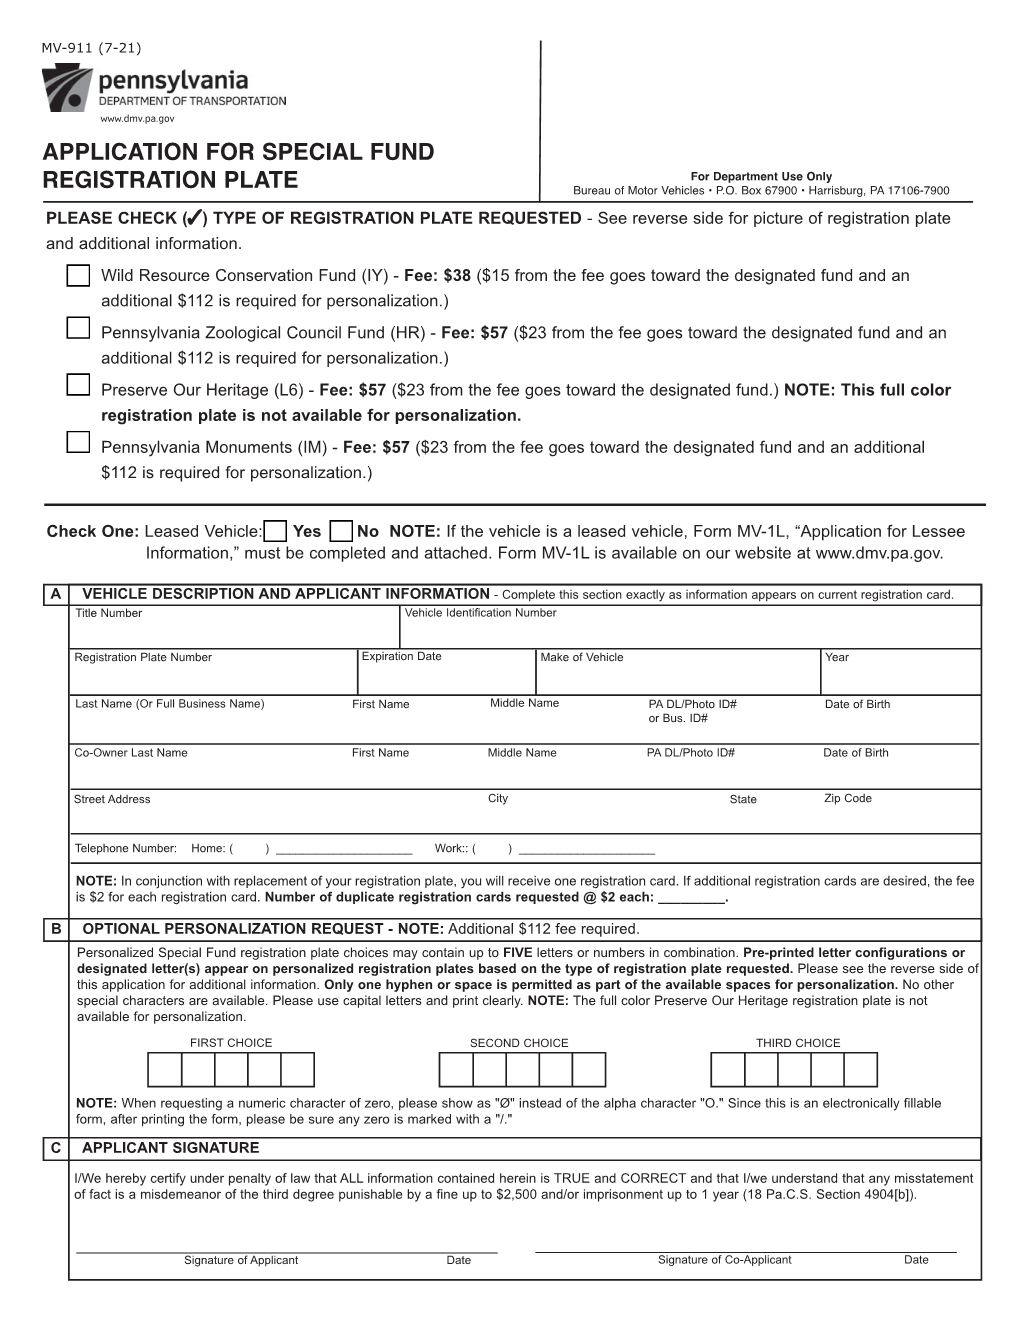 Application for Special Fund Registration Plate